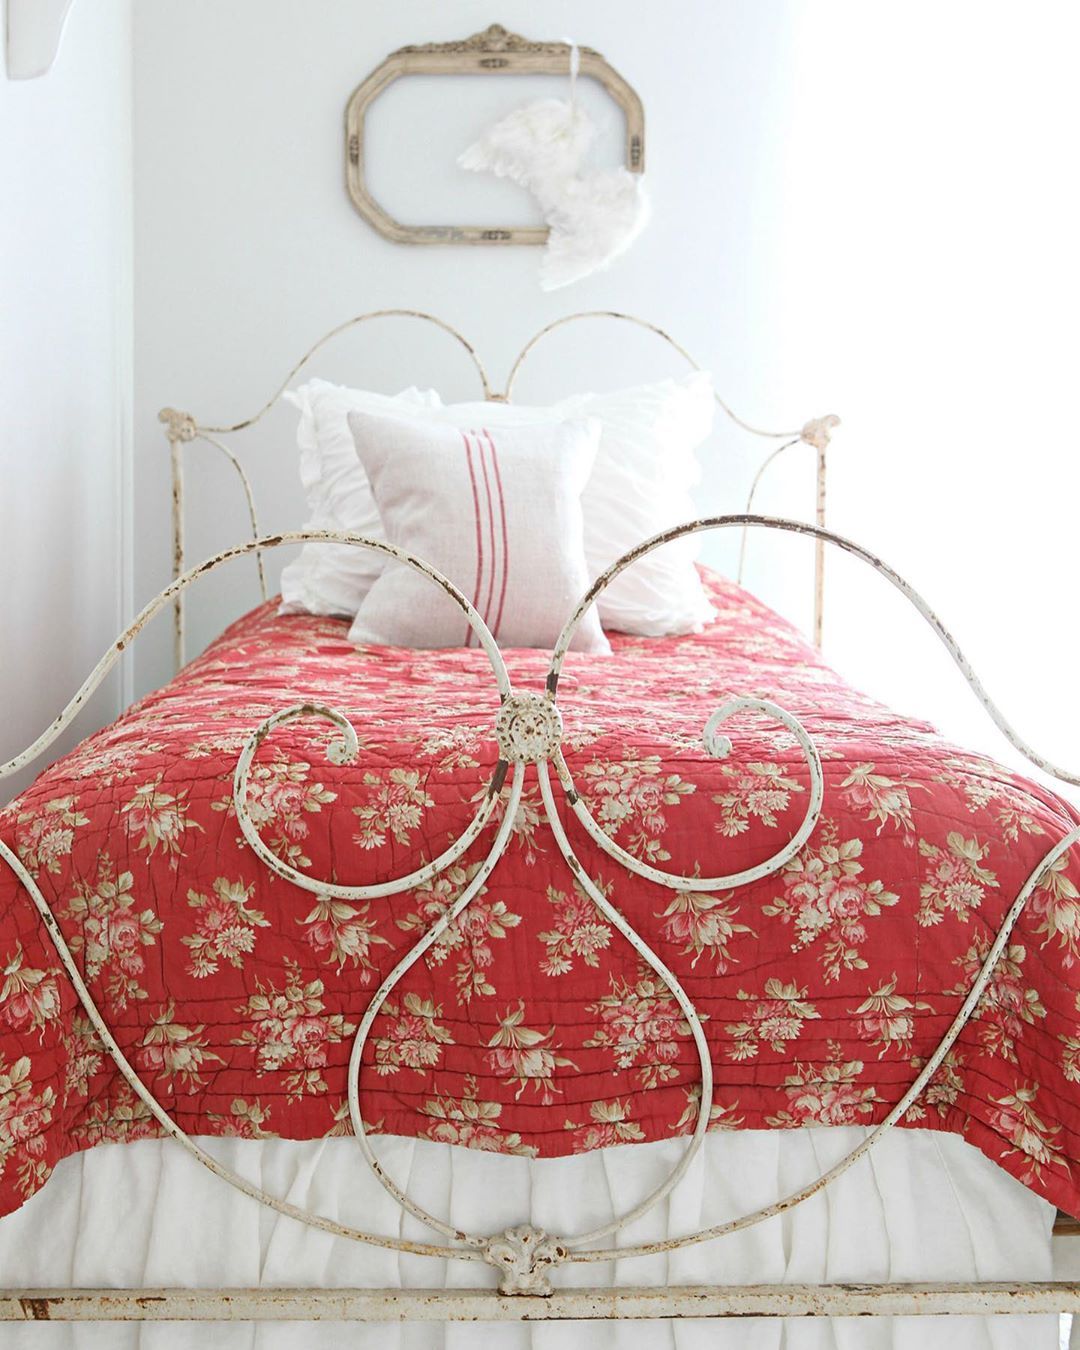 French country bedroom with Antique iron bed and red floral bedspread via @frenchlarkspur